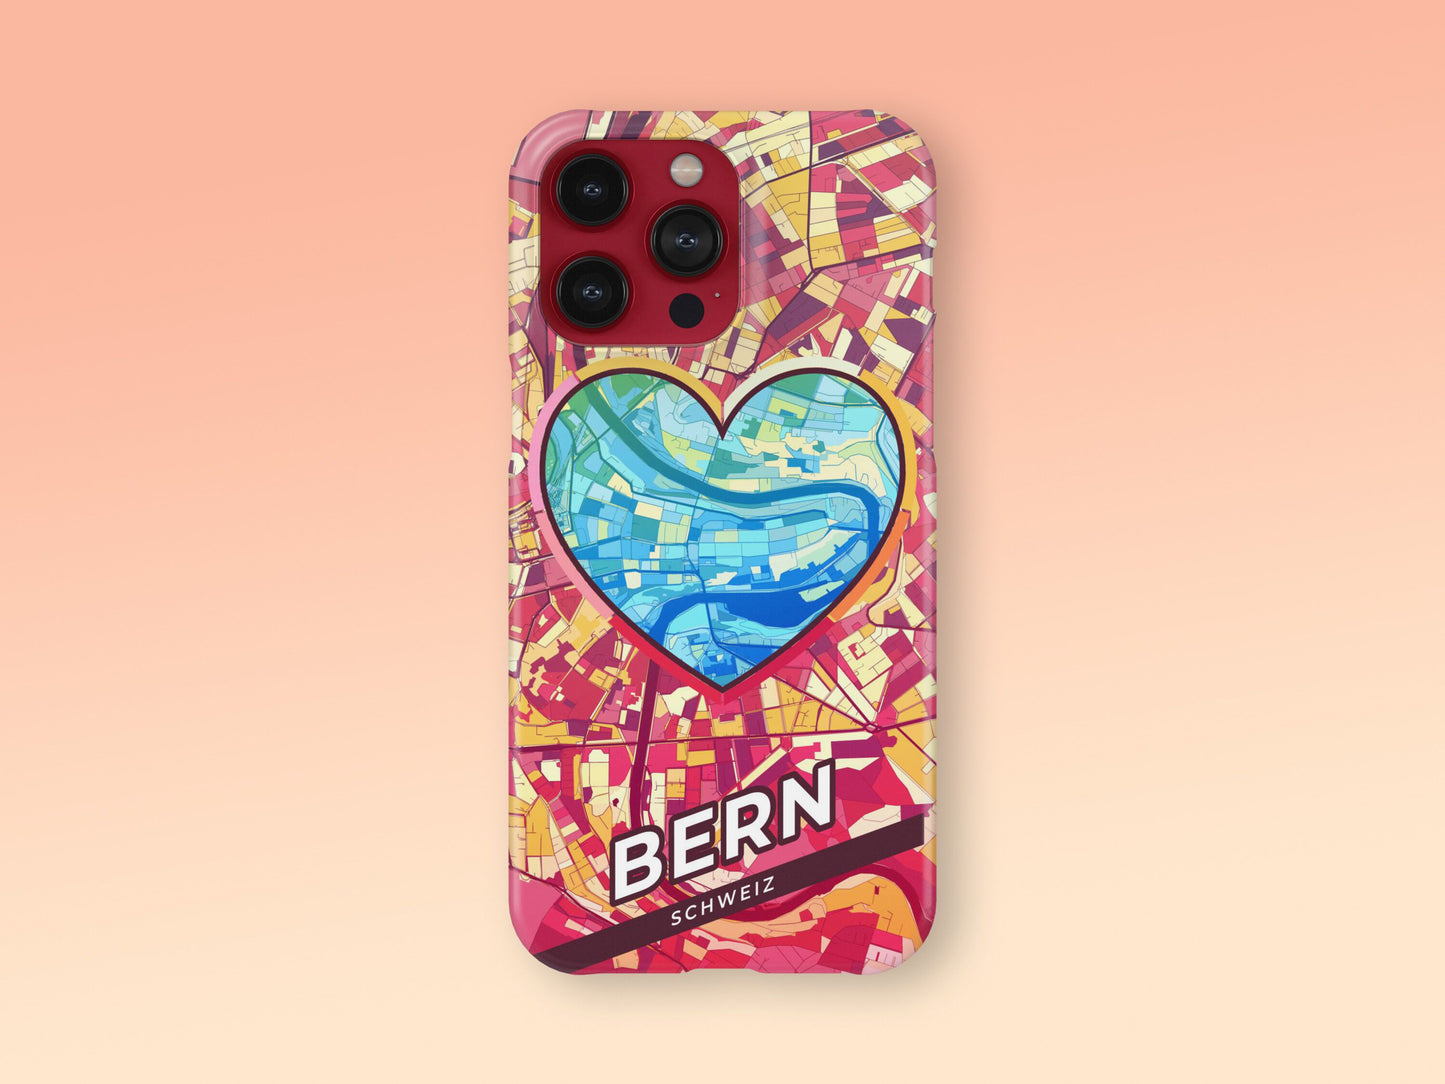 Bern Switzerland slim phone case with colorful icon. Birthday, wedding or housewarming gift. Couple match cases. 2